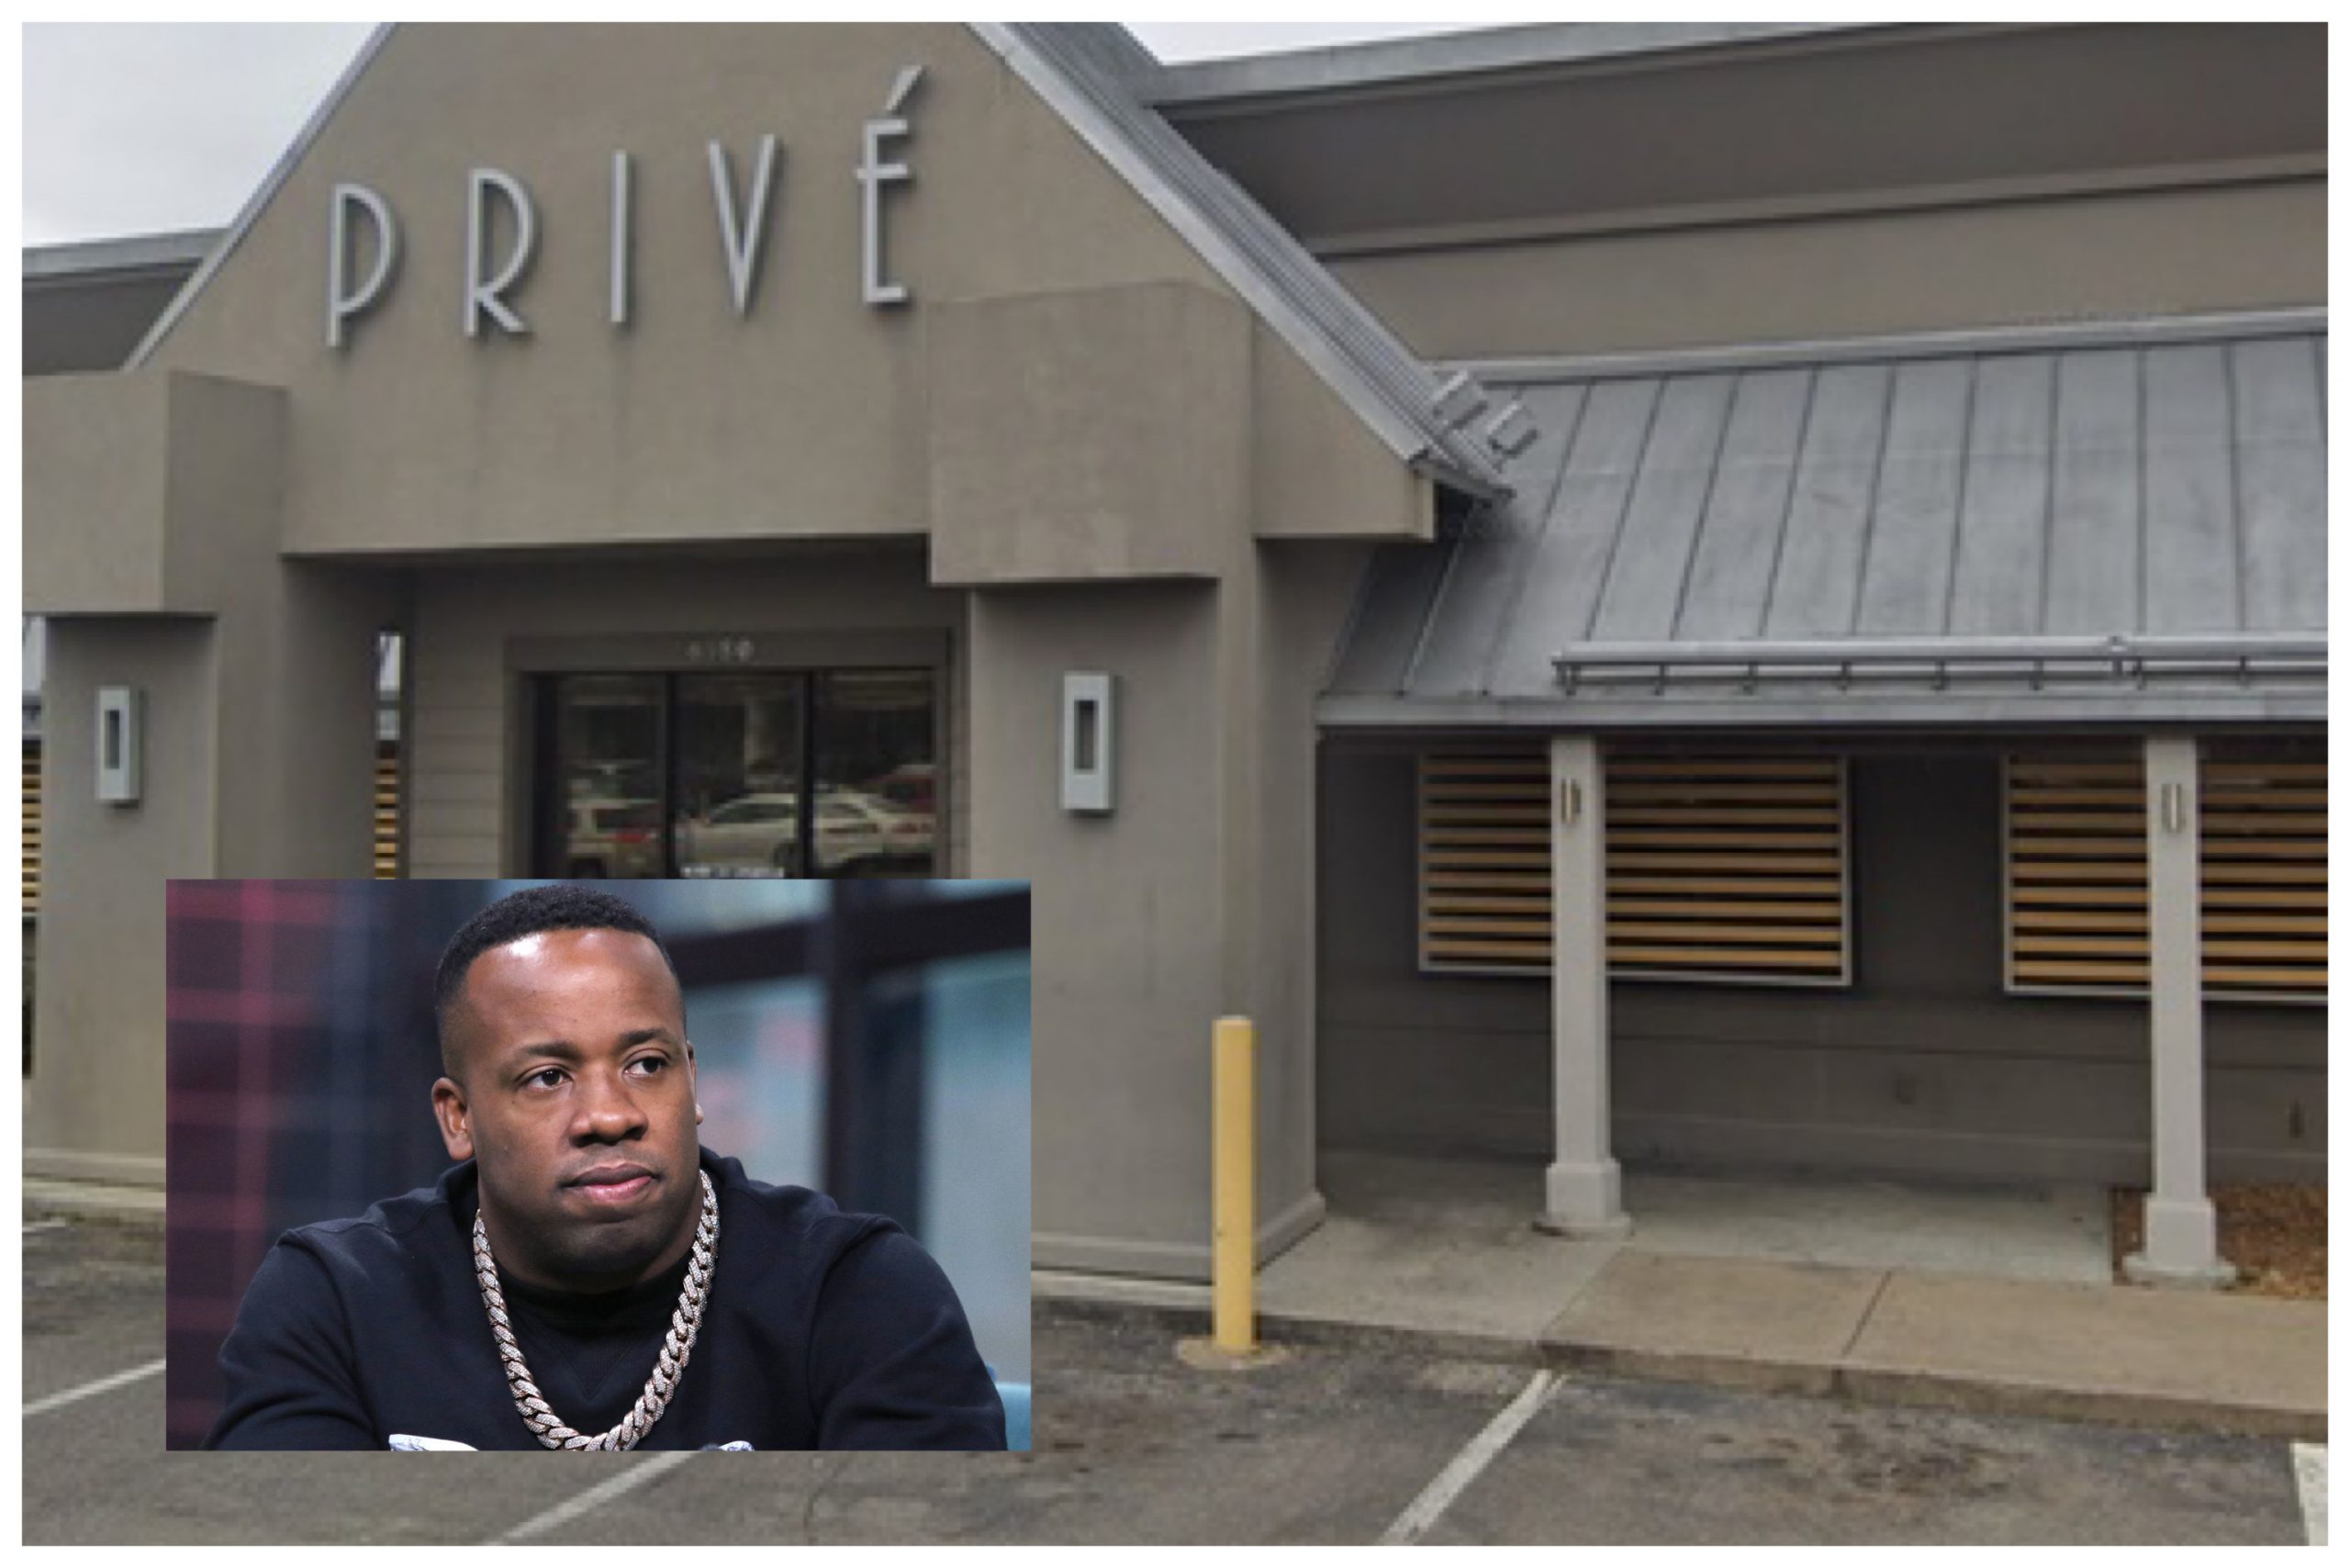 2 People Killed, 5 Wounded In Shooting At Yo Gotti’s Memphis Restaraunt